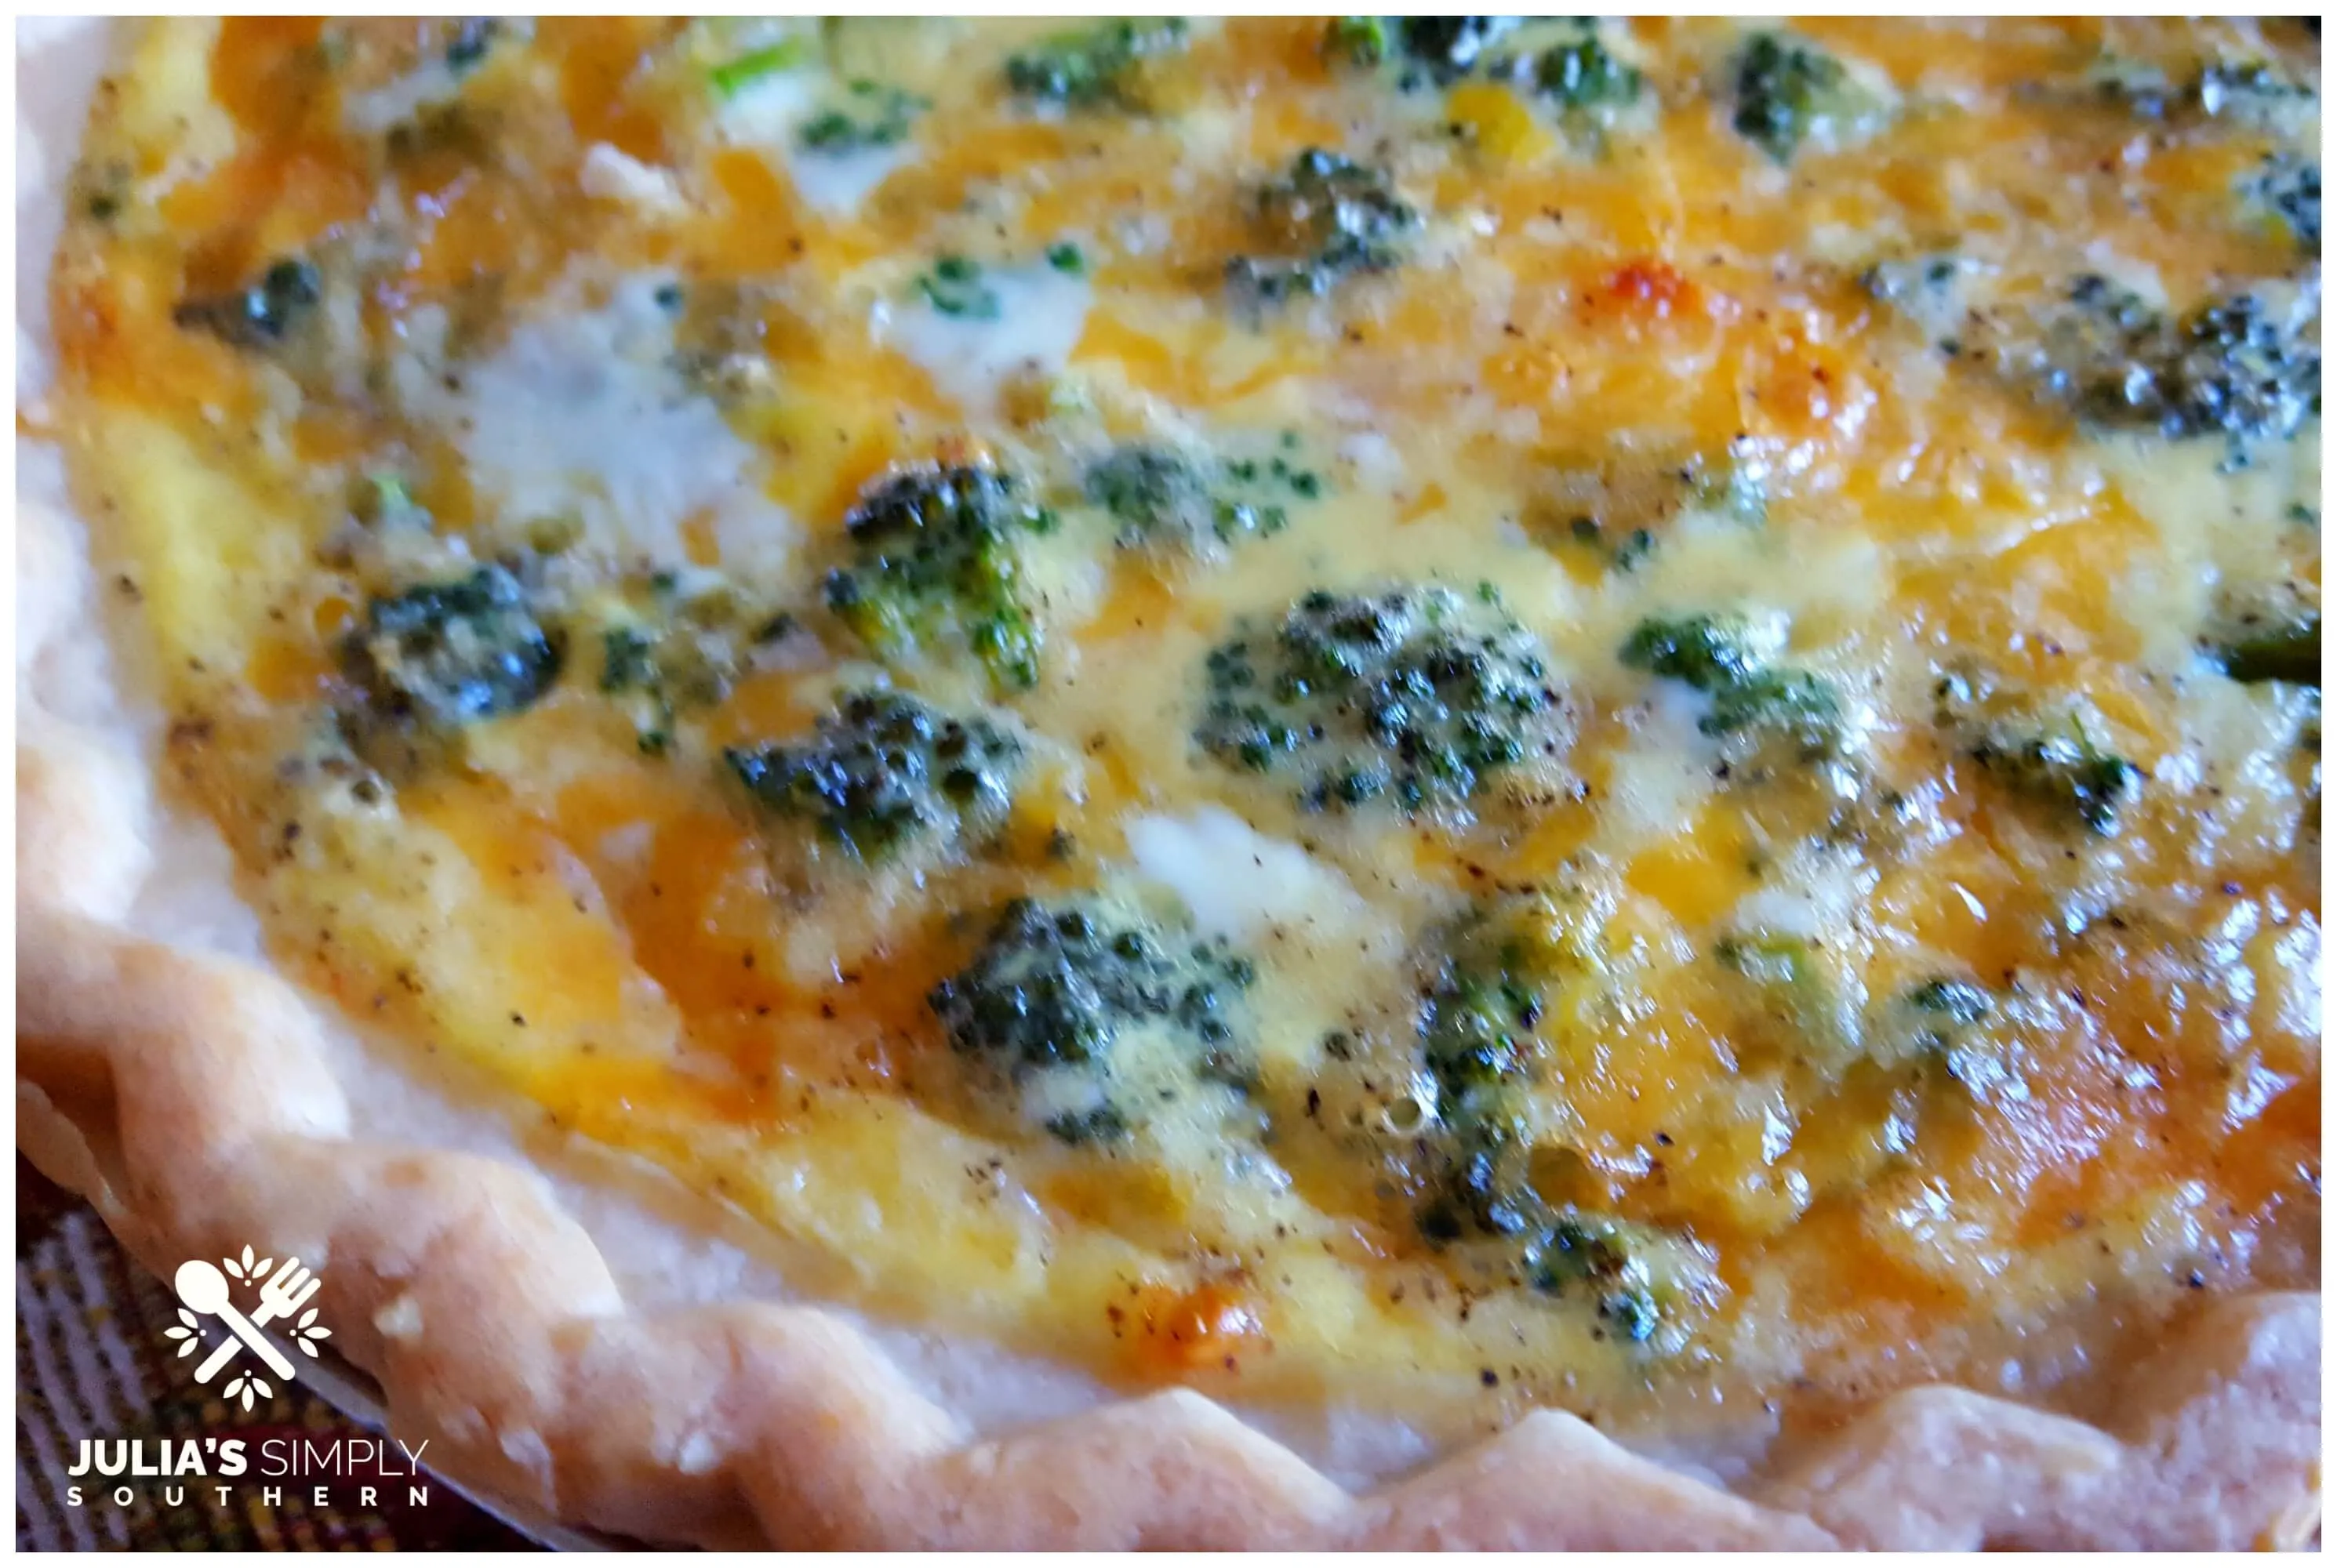 Perfectly baked broccoli and cheese quiche